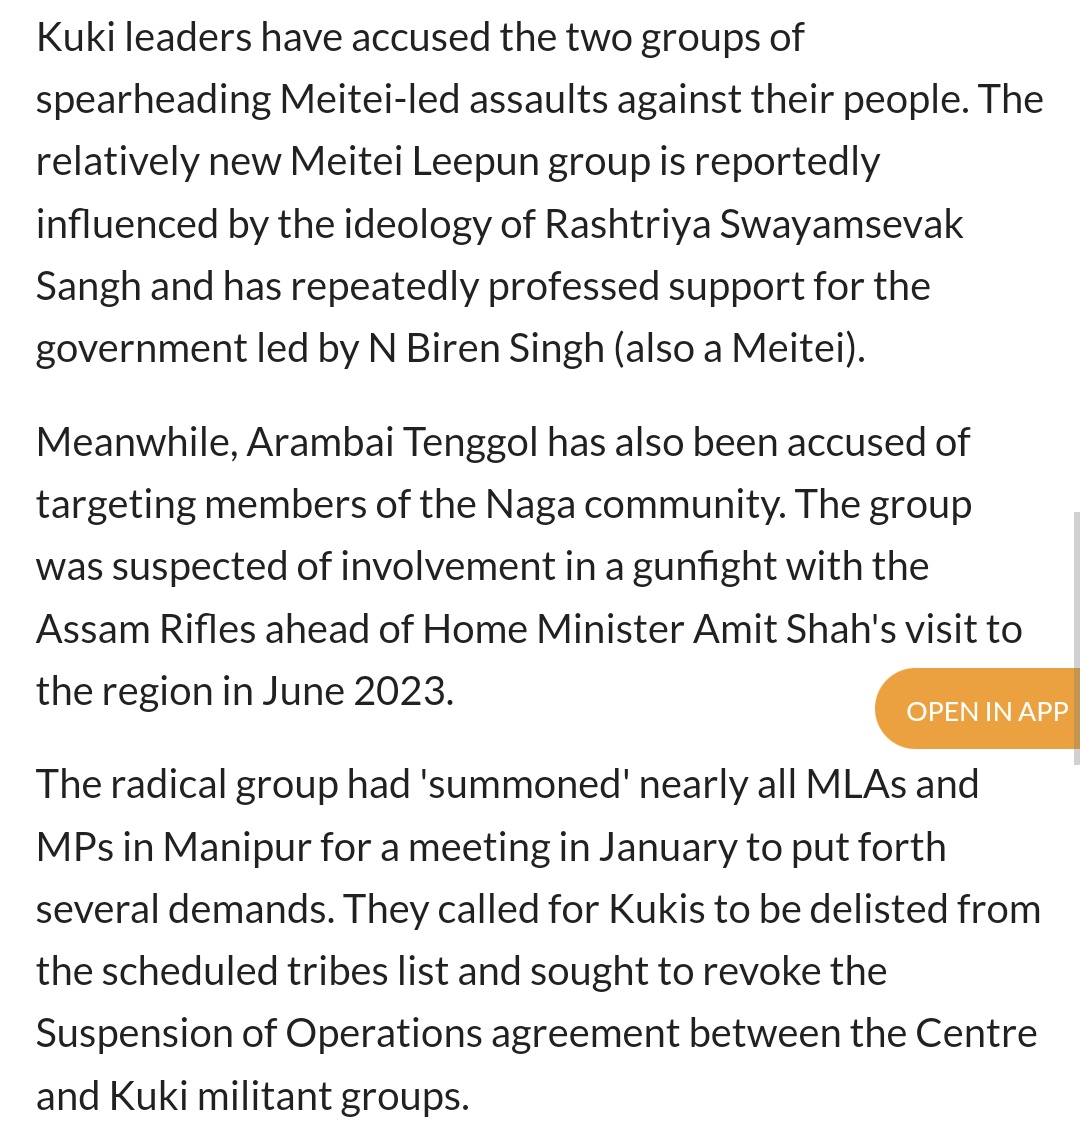 @AmitShah statement on “Integrity of Manipur” is a bogus phrase. The BJP leader must realise that fixing the Manipur crisis by formalising a ‘Separate Administration’ for the Kukis is far more important than scoring political points. #ManipurBJPGovtViolationOfHumanRights